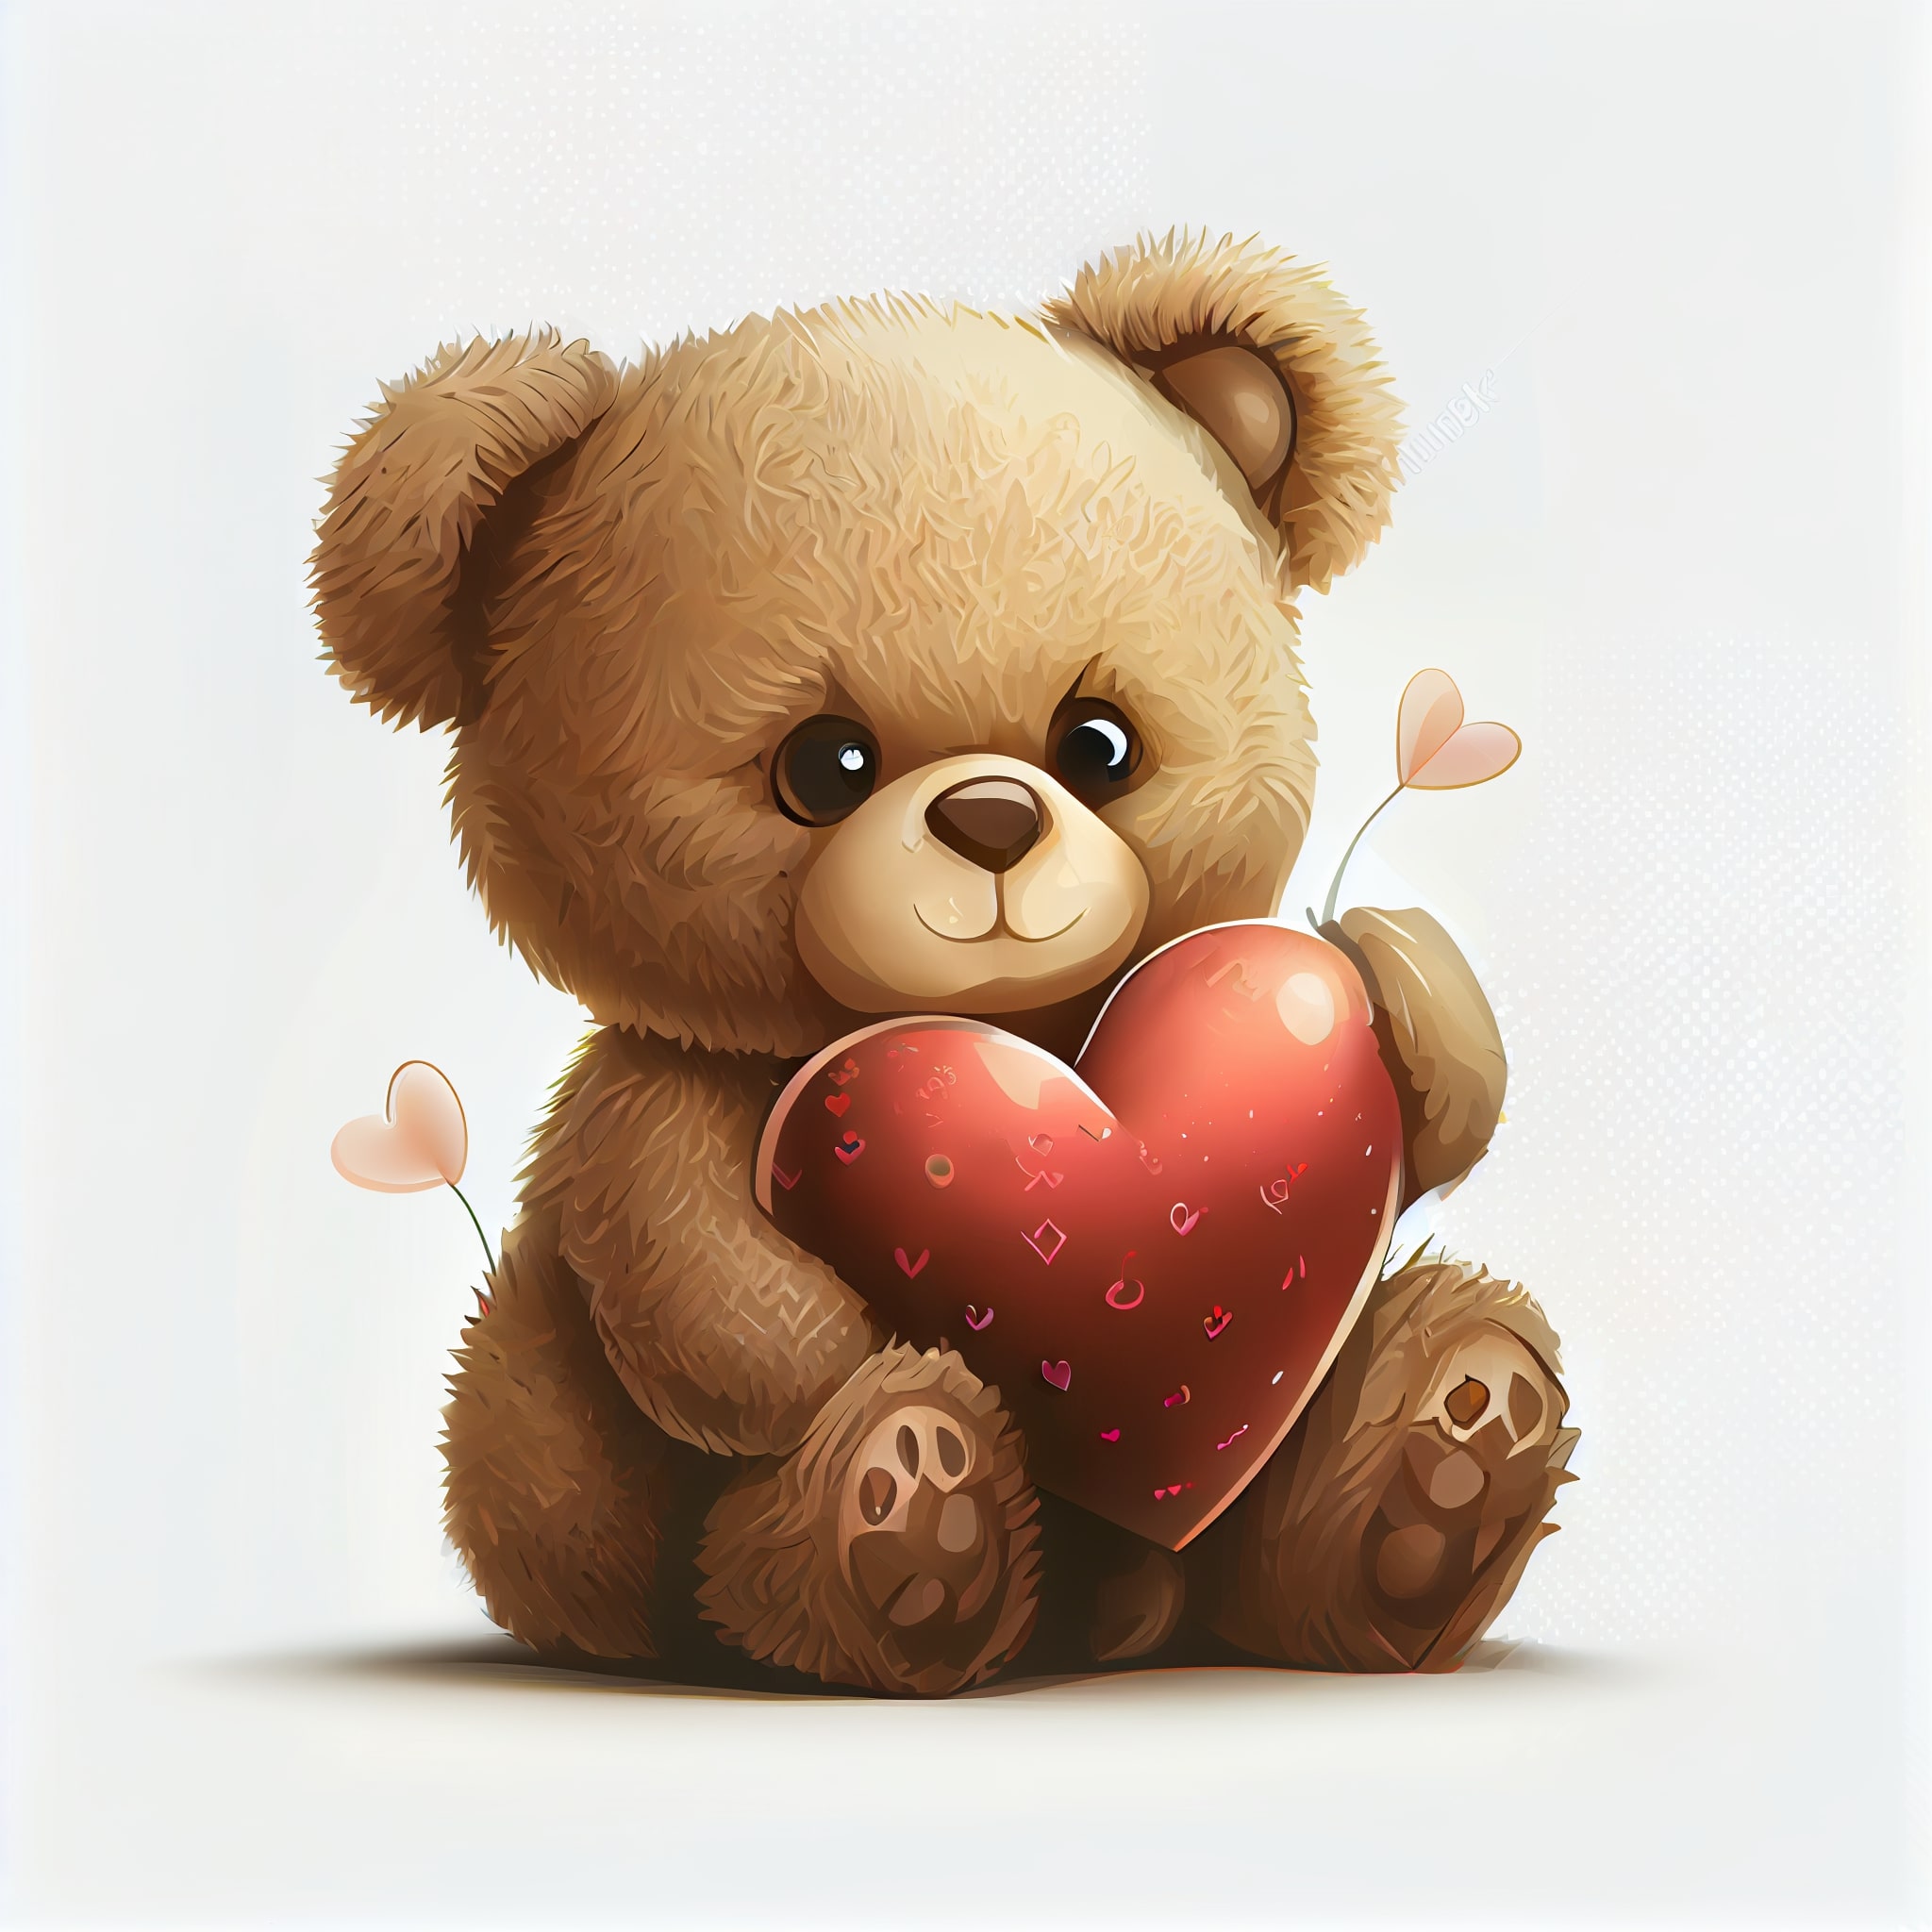 Brown teddy bear holding a red heart.